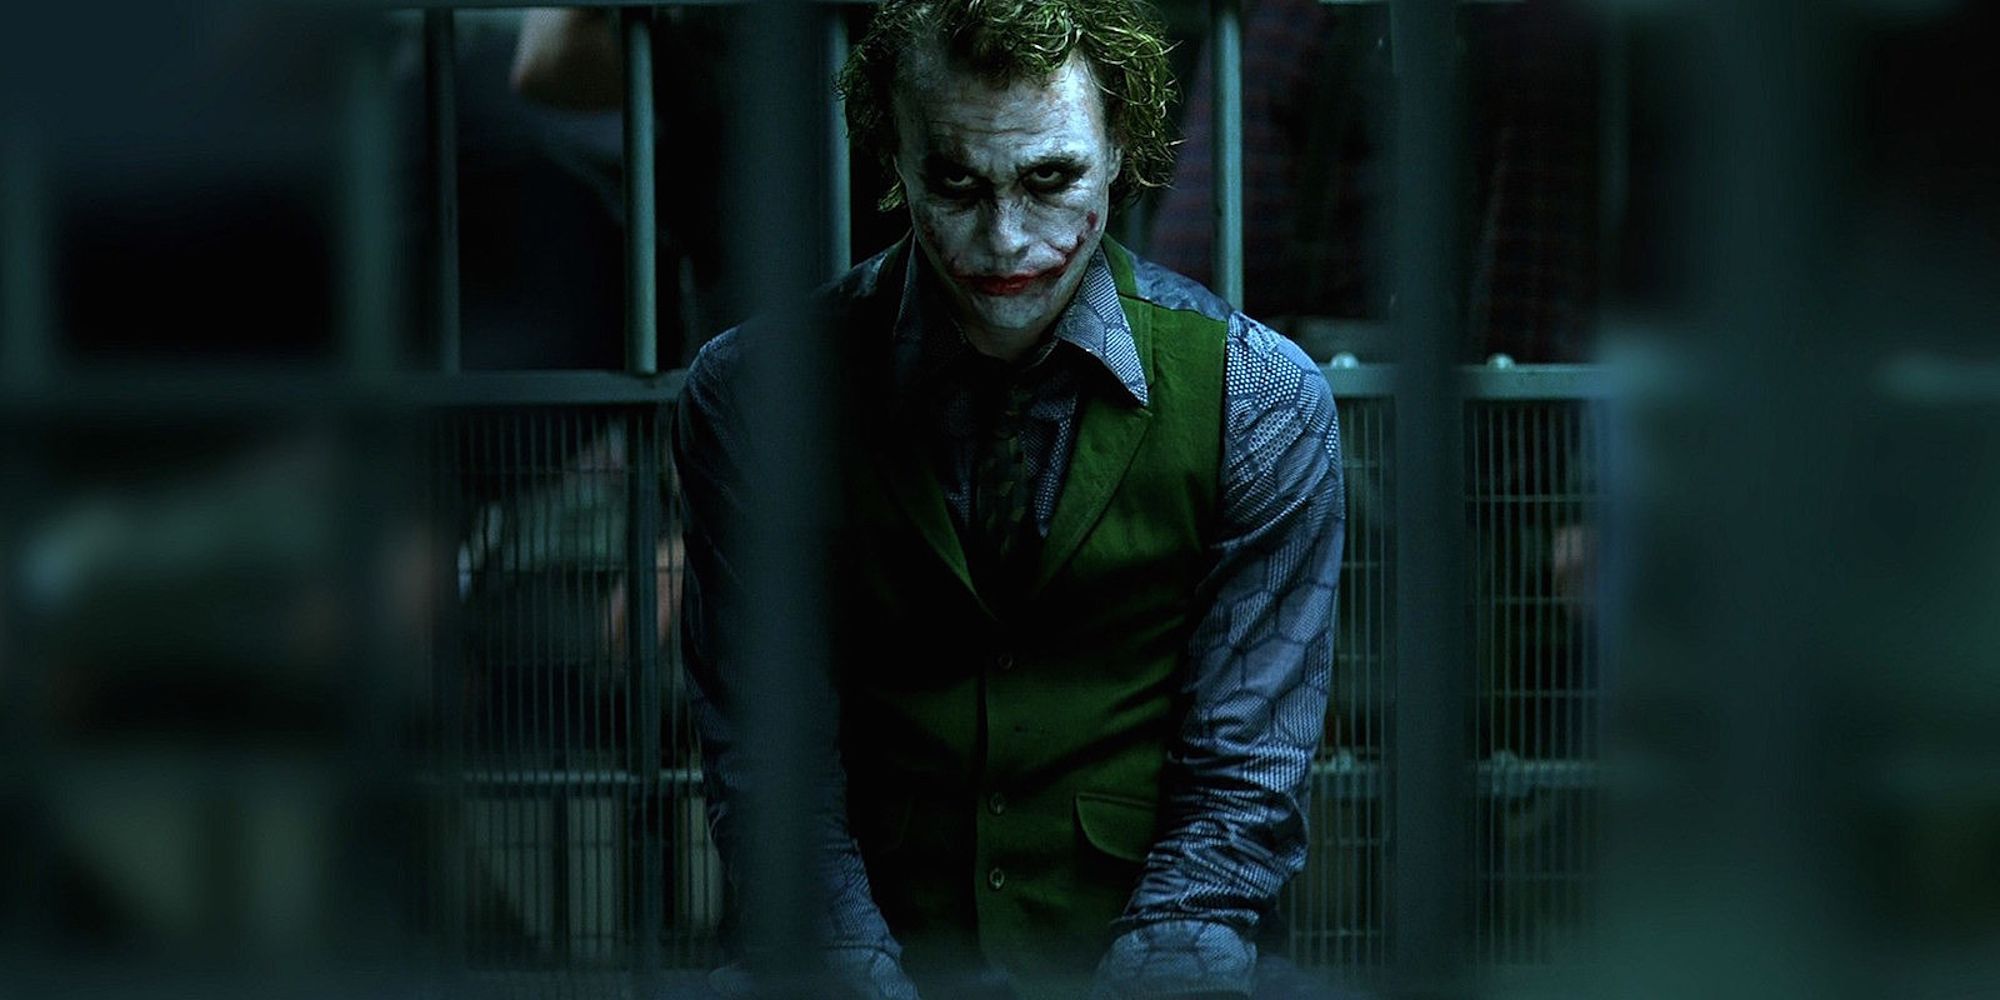 Heath Ledger as The Joker sitting in a cell in The Dark Knight